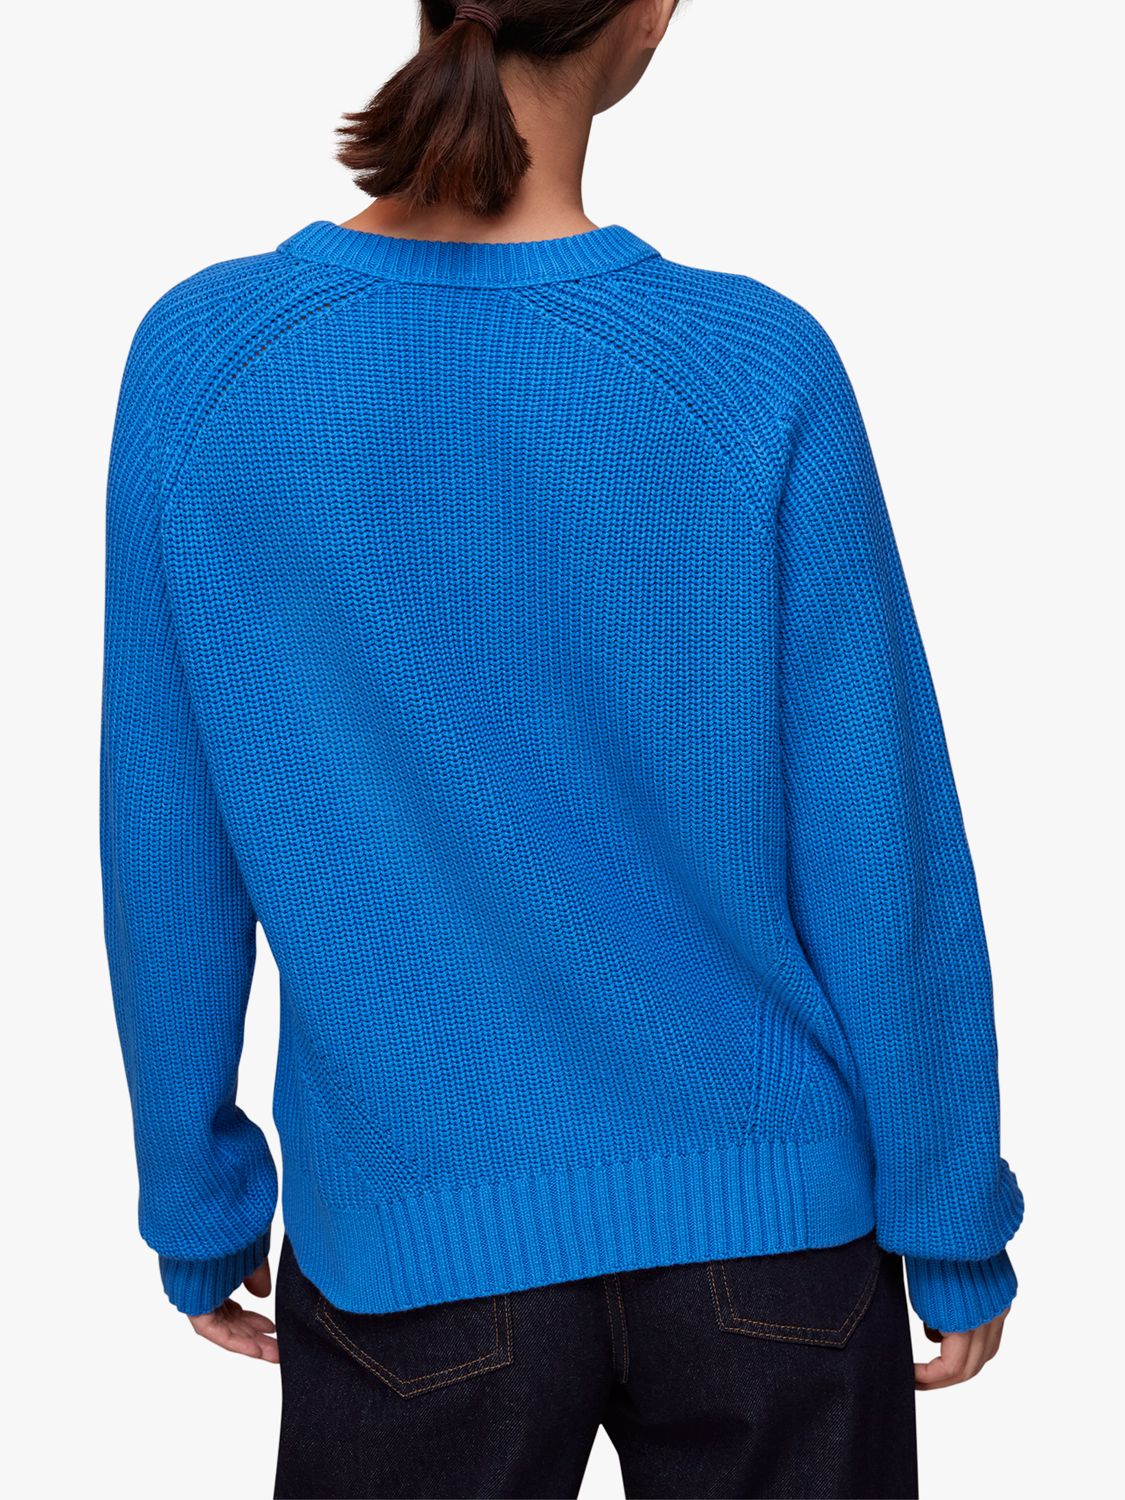 Buy Whistles Ribbed Cotton Crew Neck Jumper Online at johnlewis.com